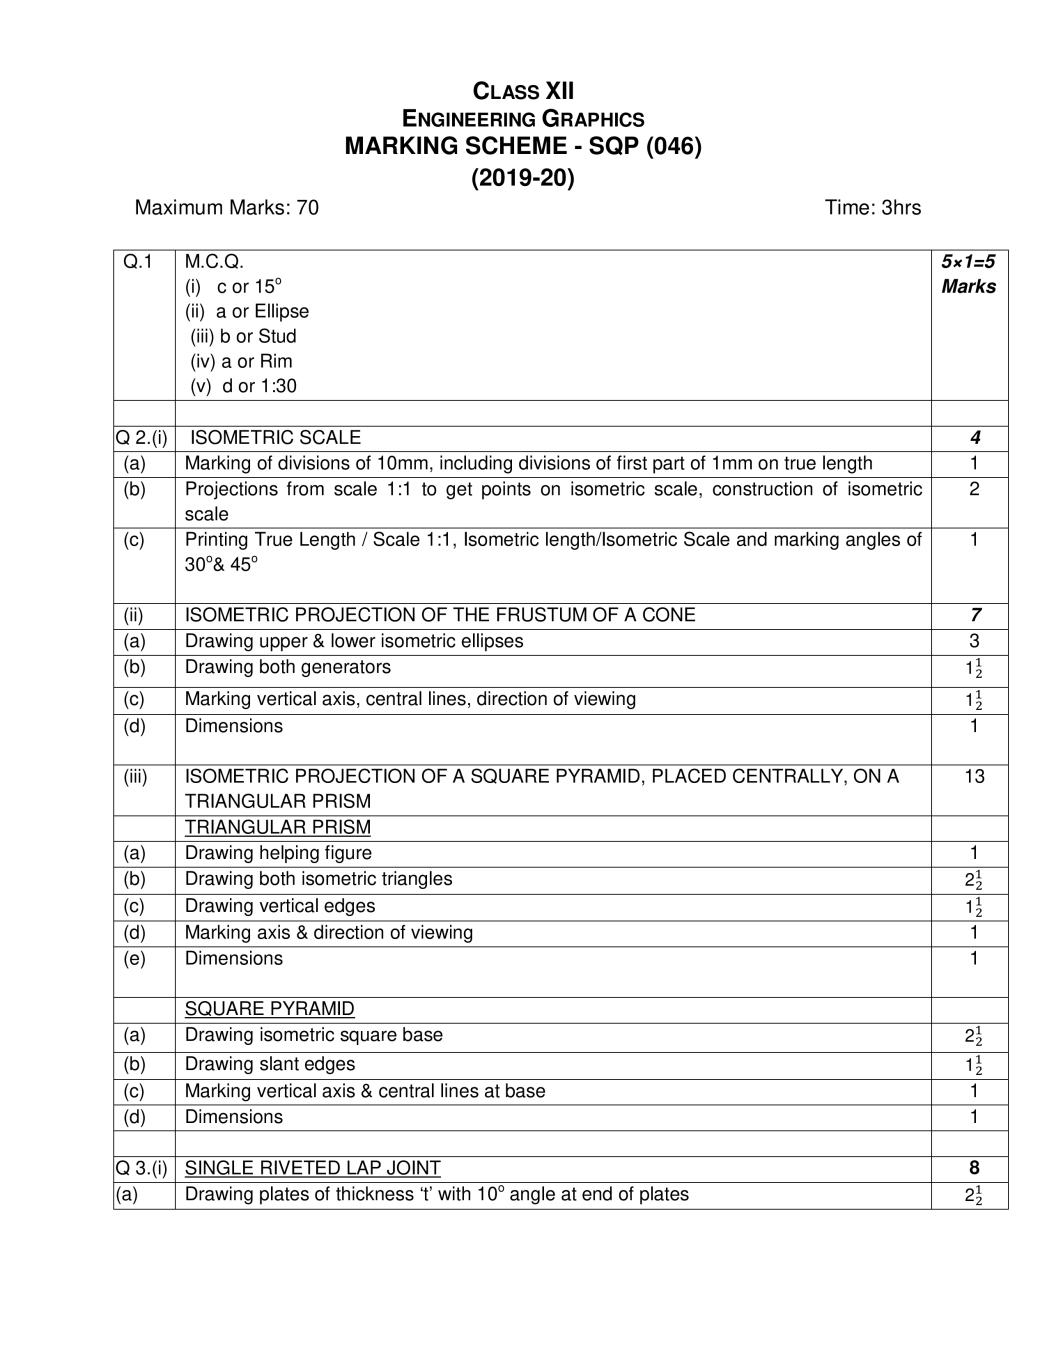 CBSE Class 12 Marking Scheme 2020 for Engineering Graphics - Page 1